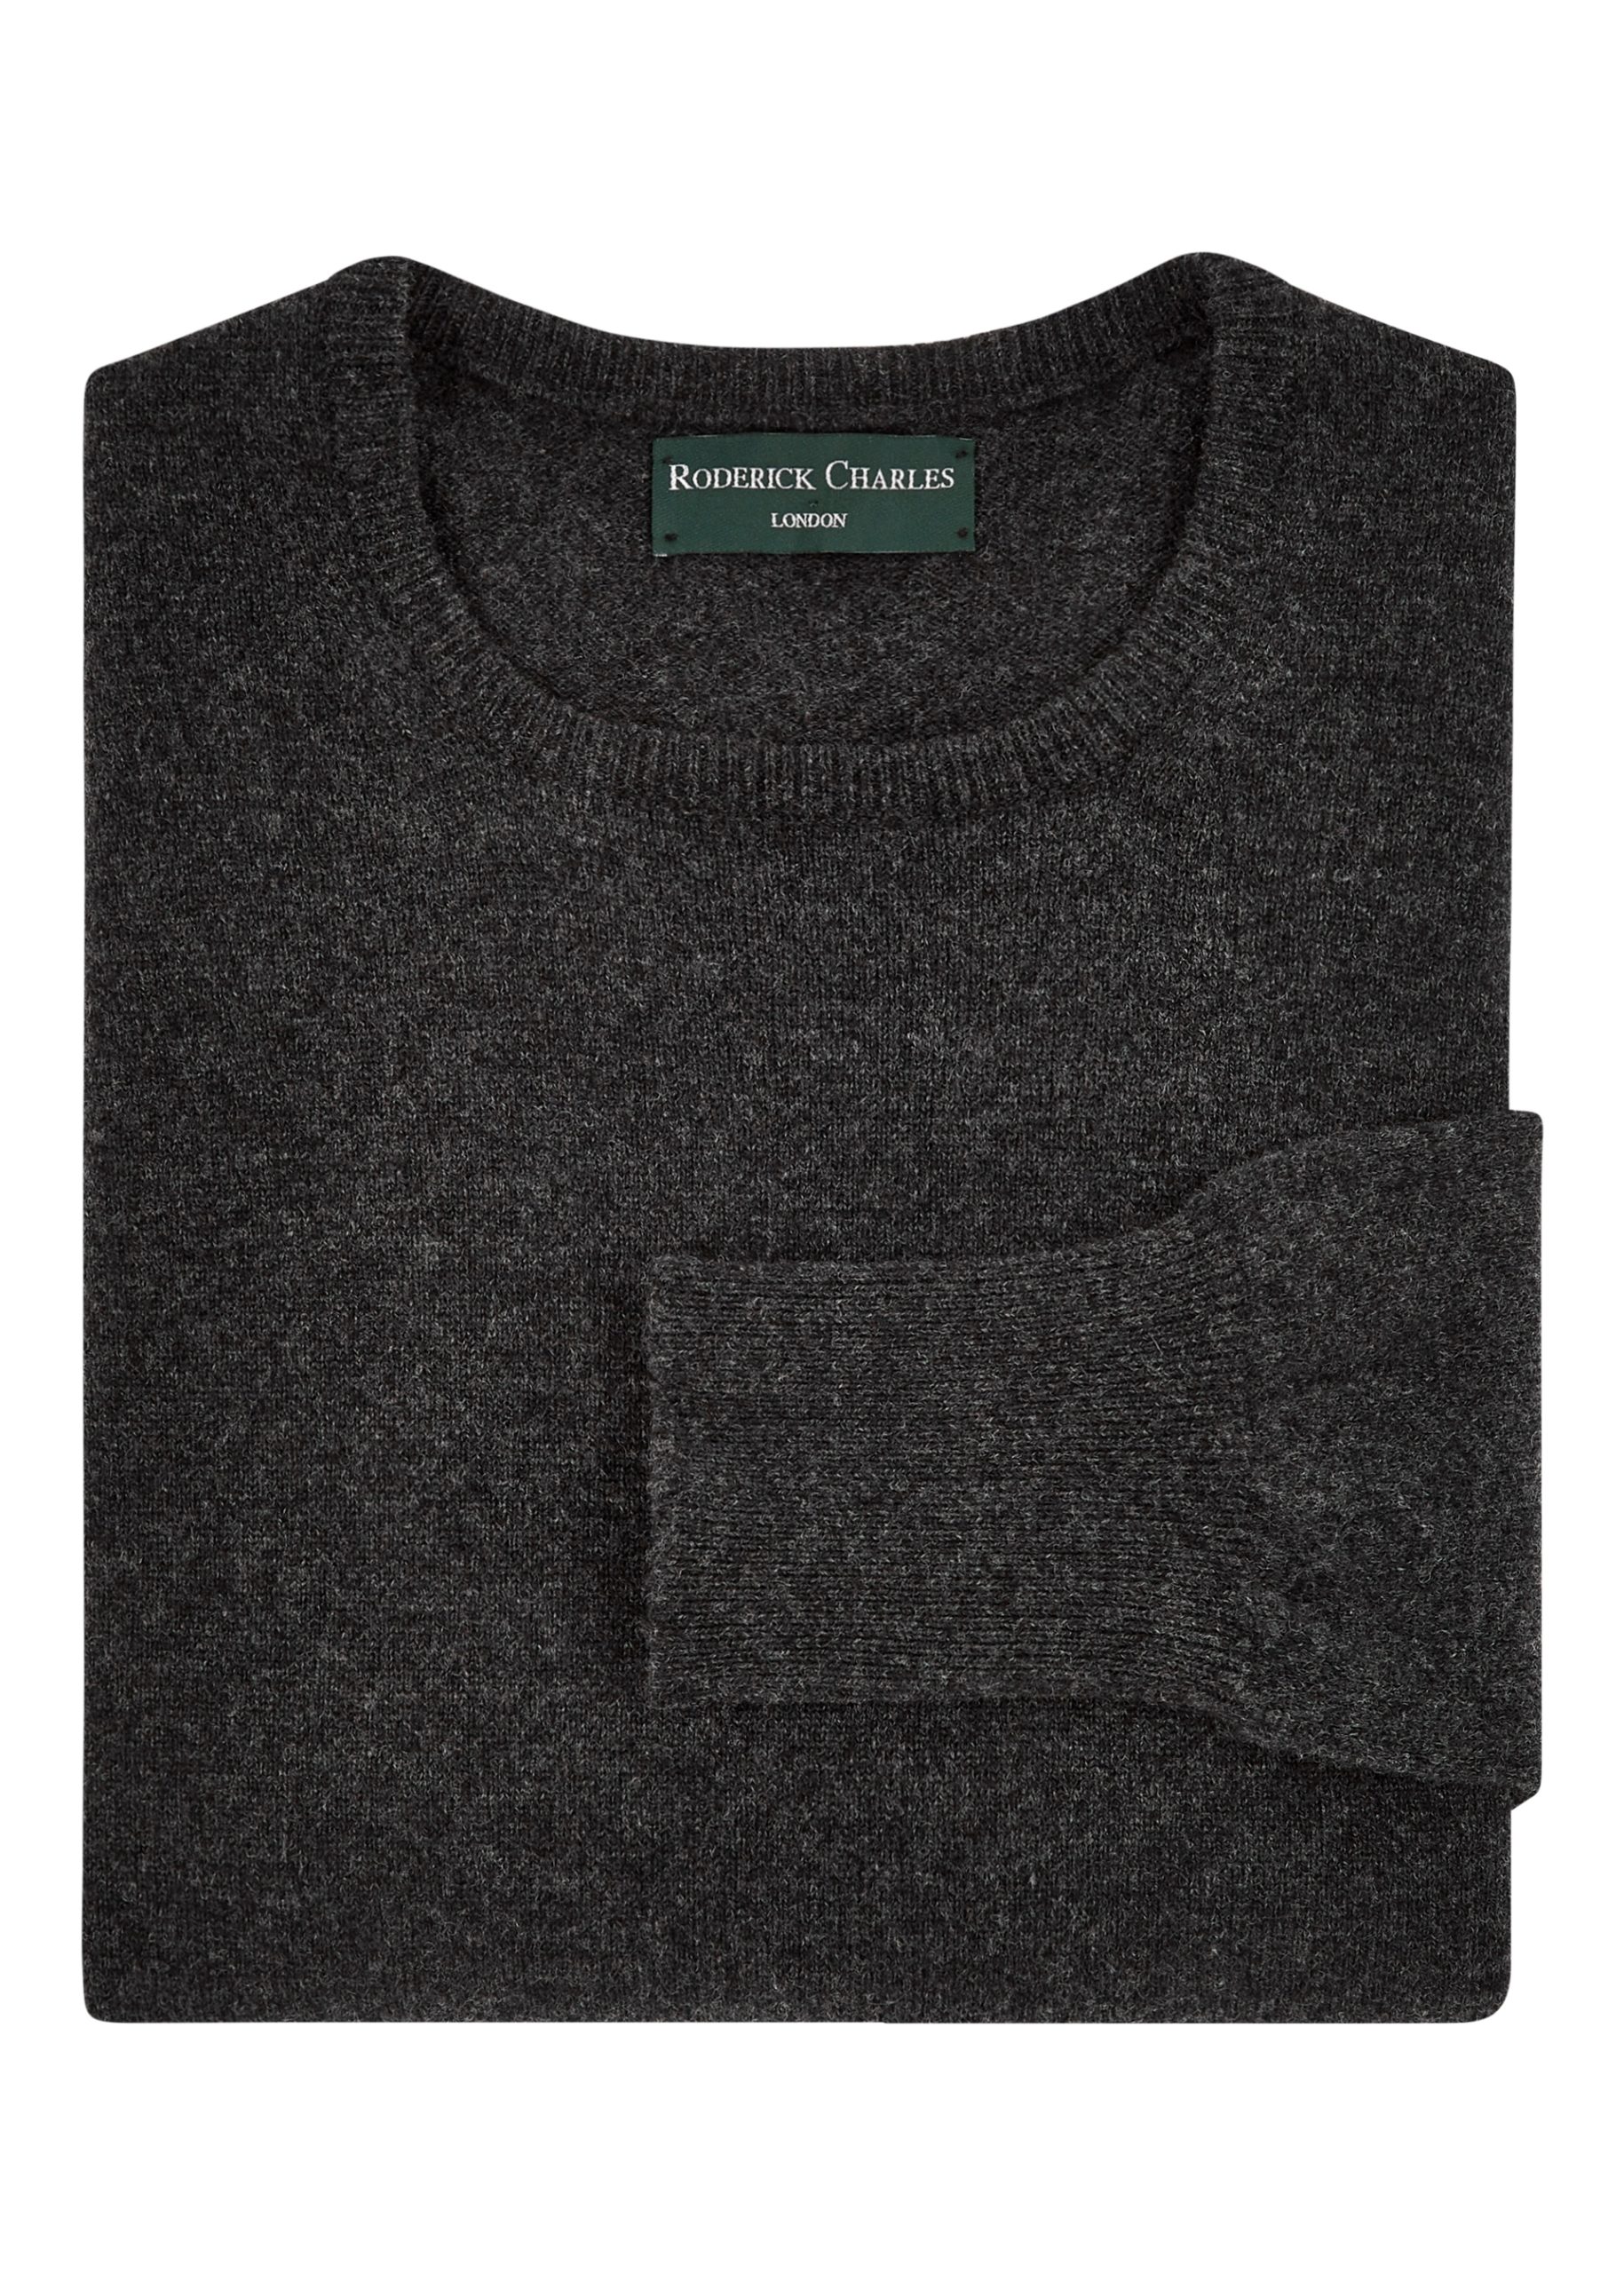 Men’s lambswool crew neck in charcoal grey styled with moleskin trousers